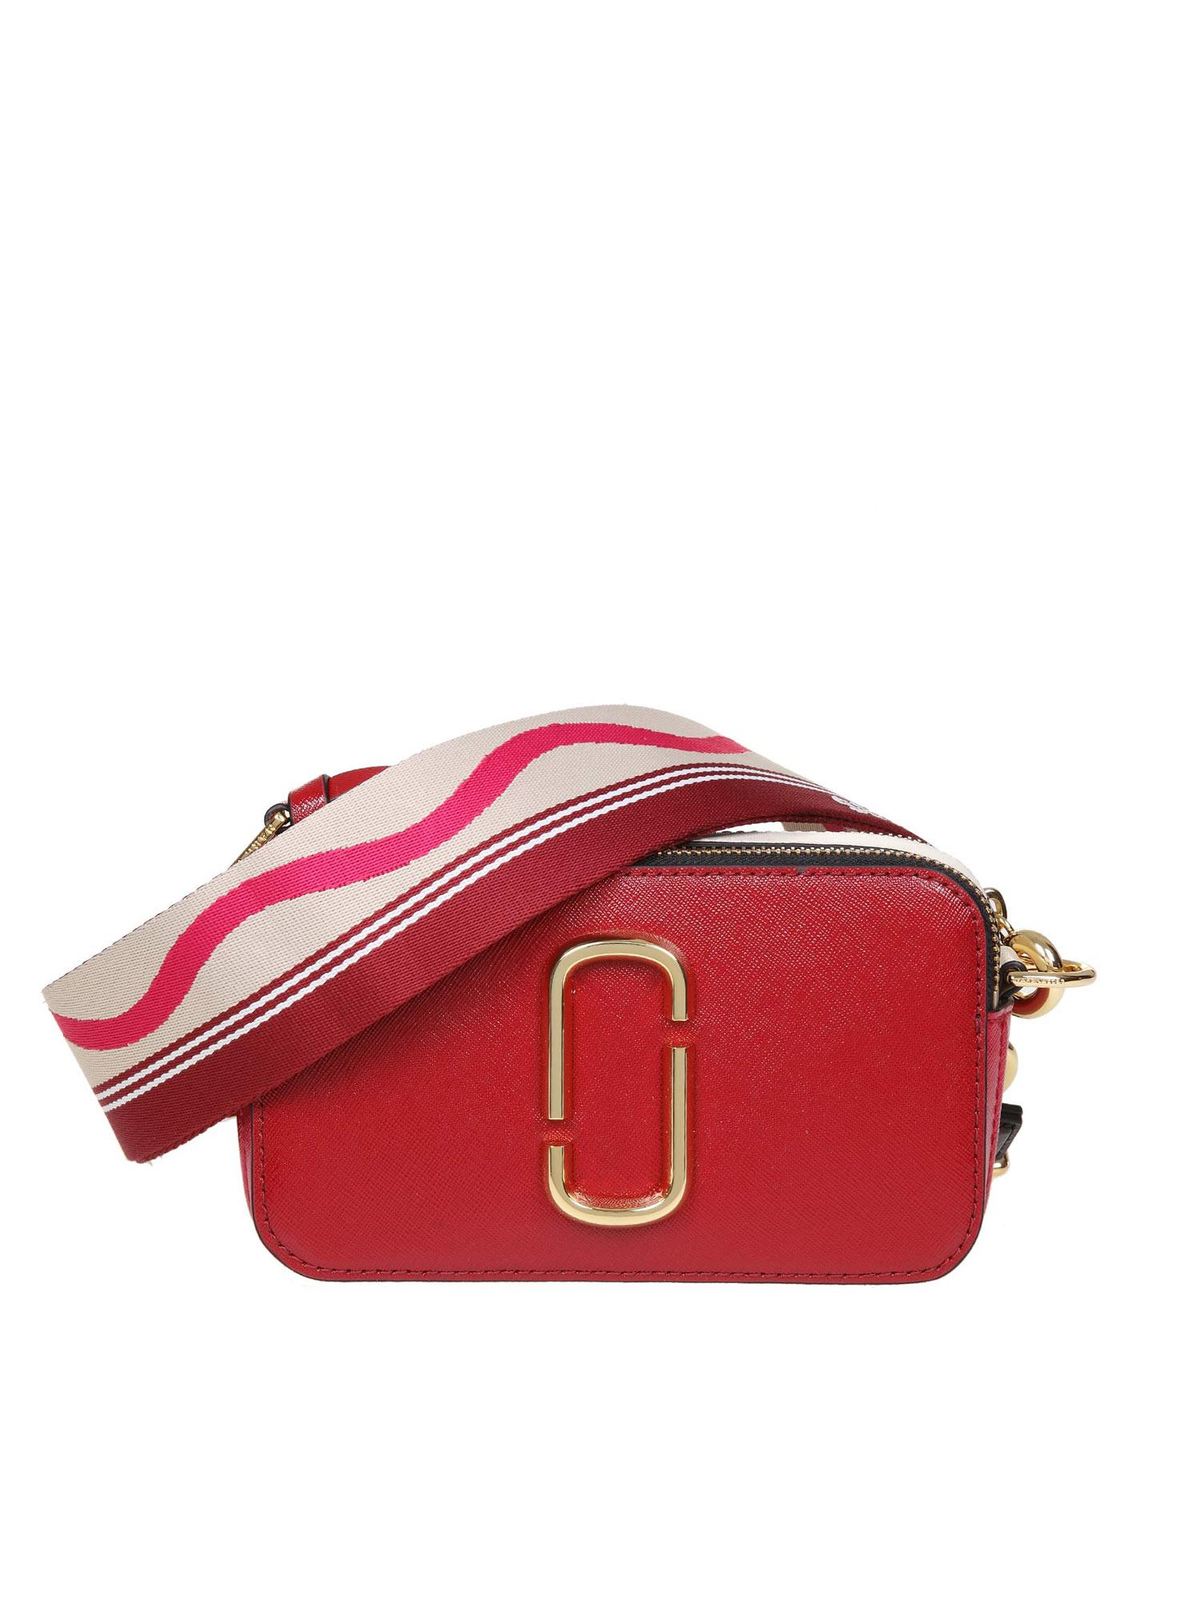 Marc Jacobs The Snapshot Crossbody Bag Multicolor in Leather with